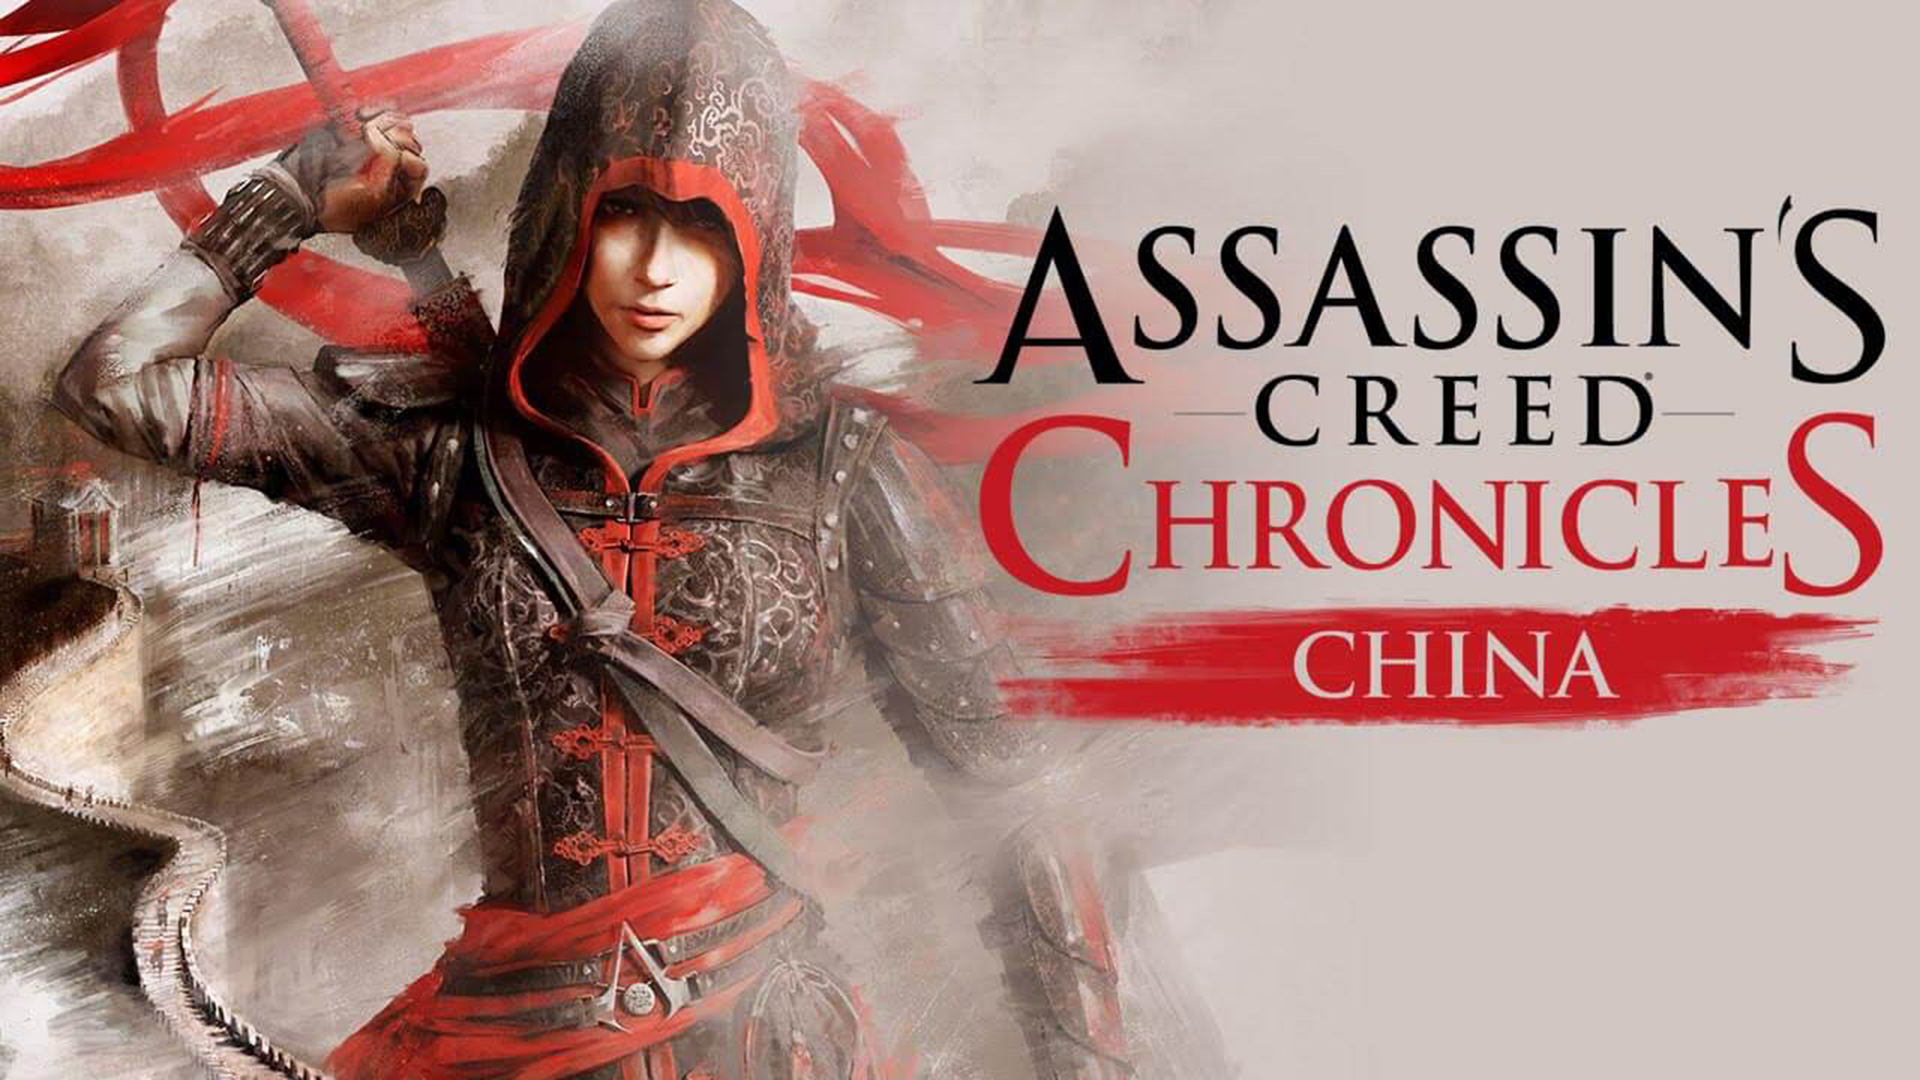 Assassins creed chronicles trilogy steam фото 32